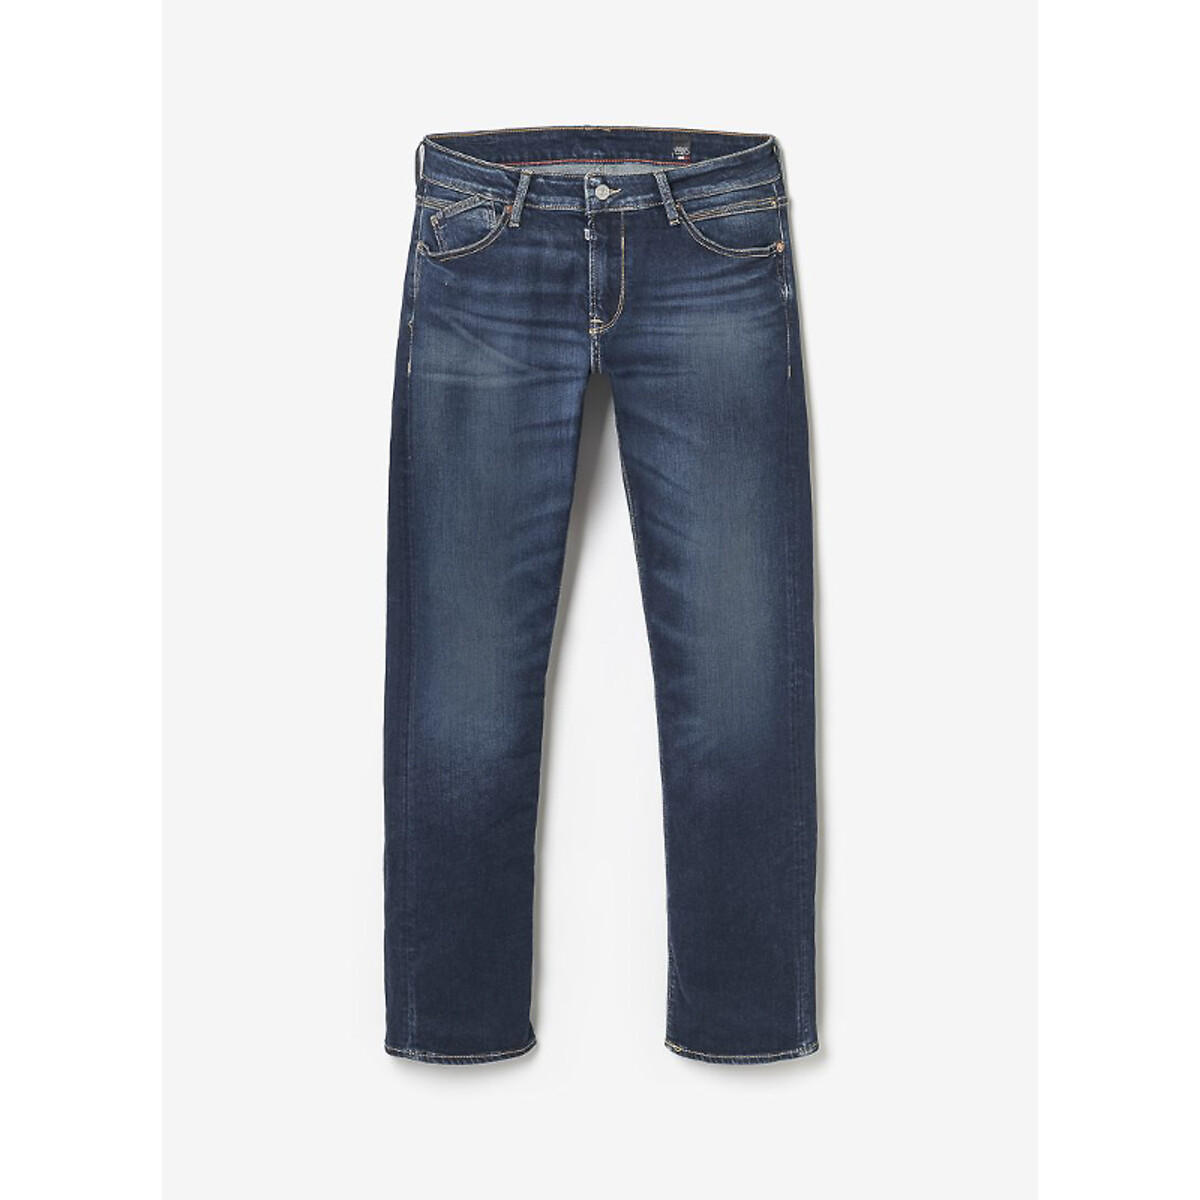 800/12 Straight Jeans in Mid Rise